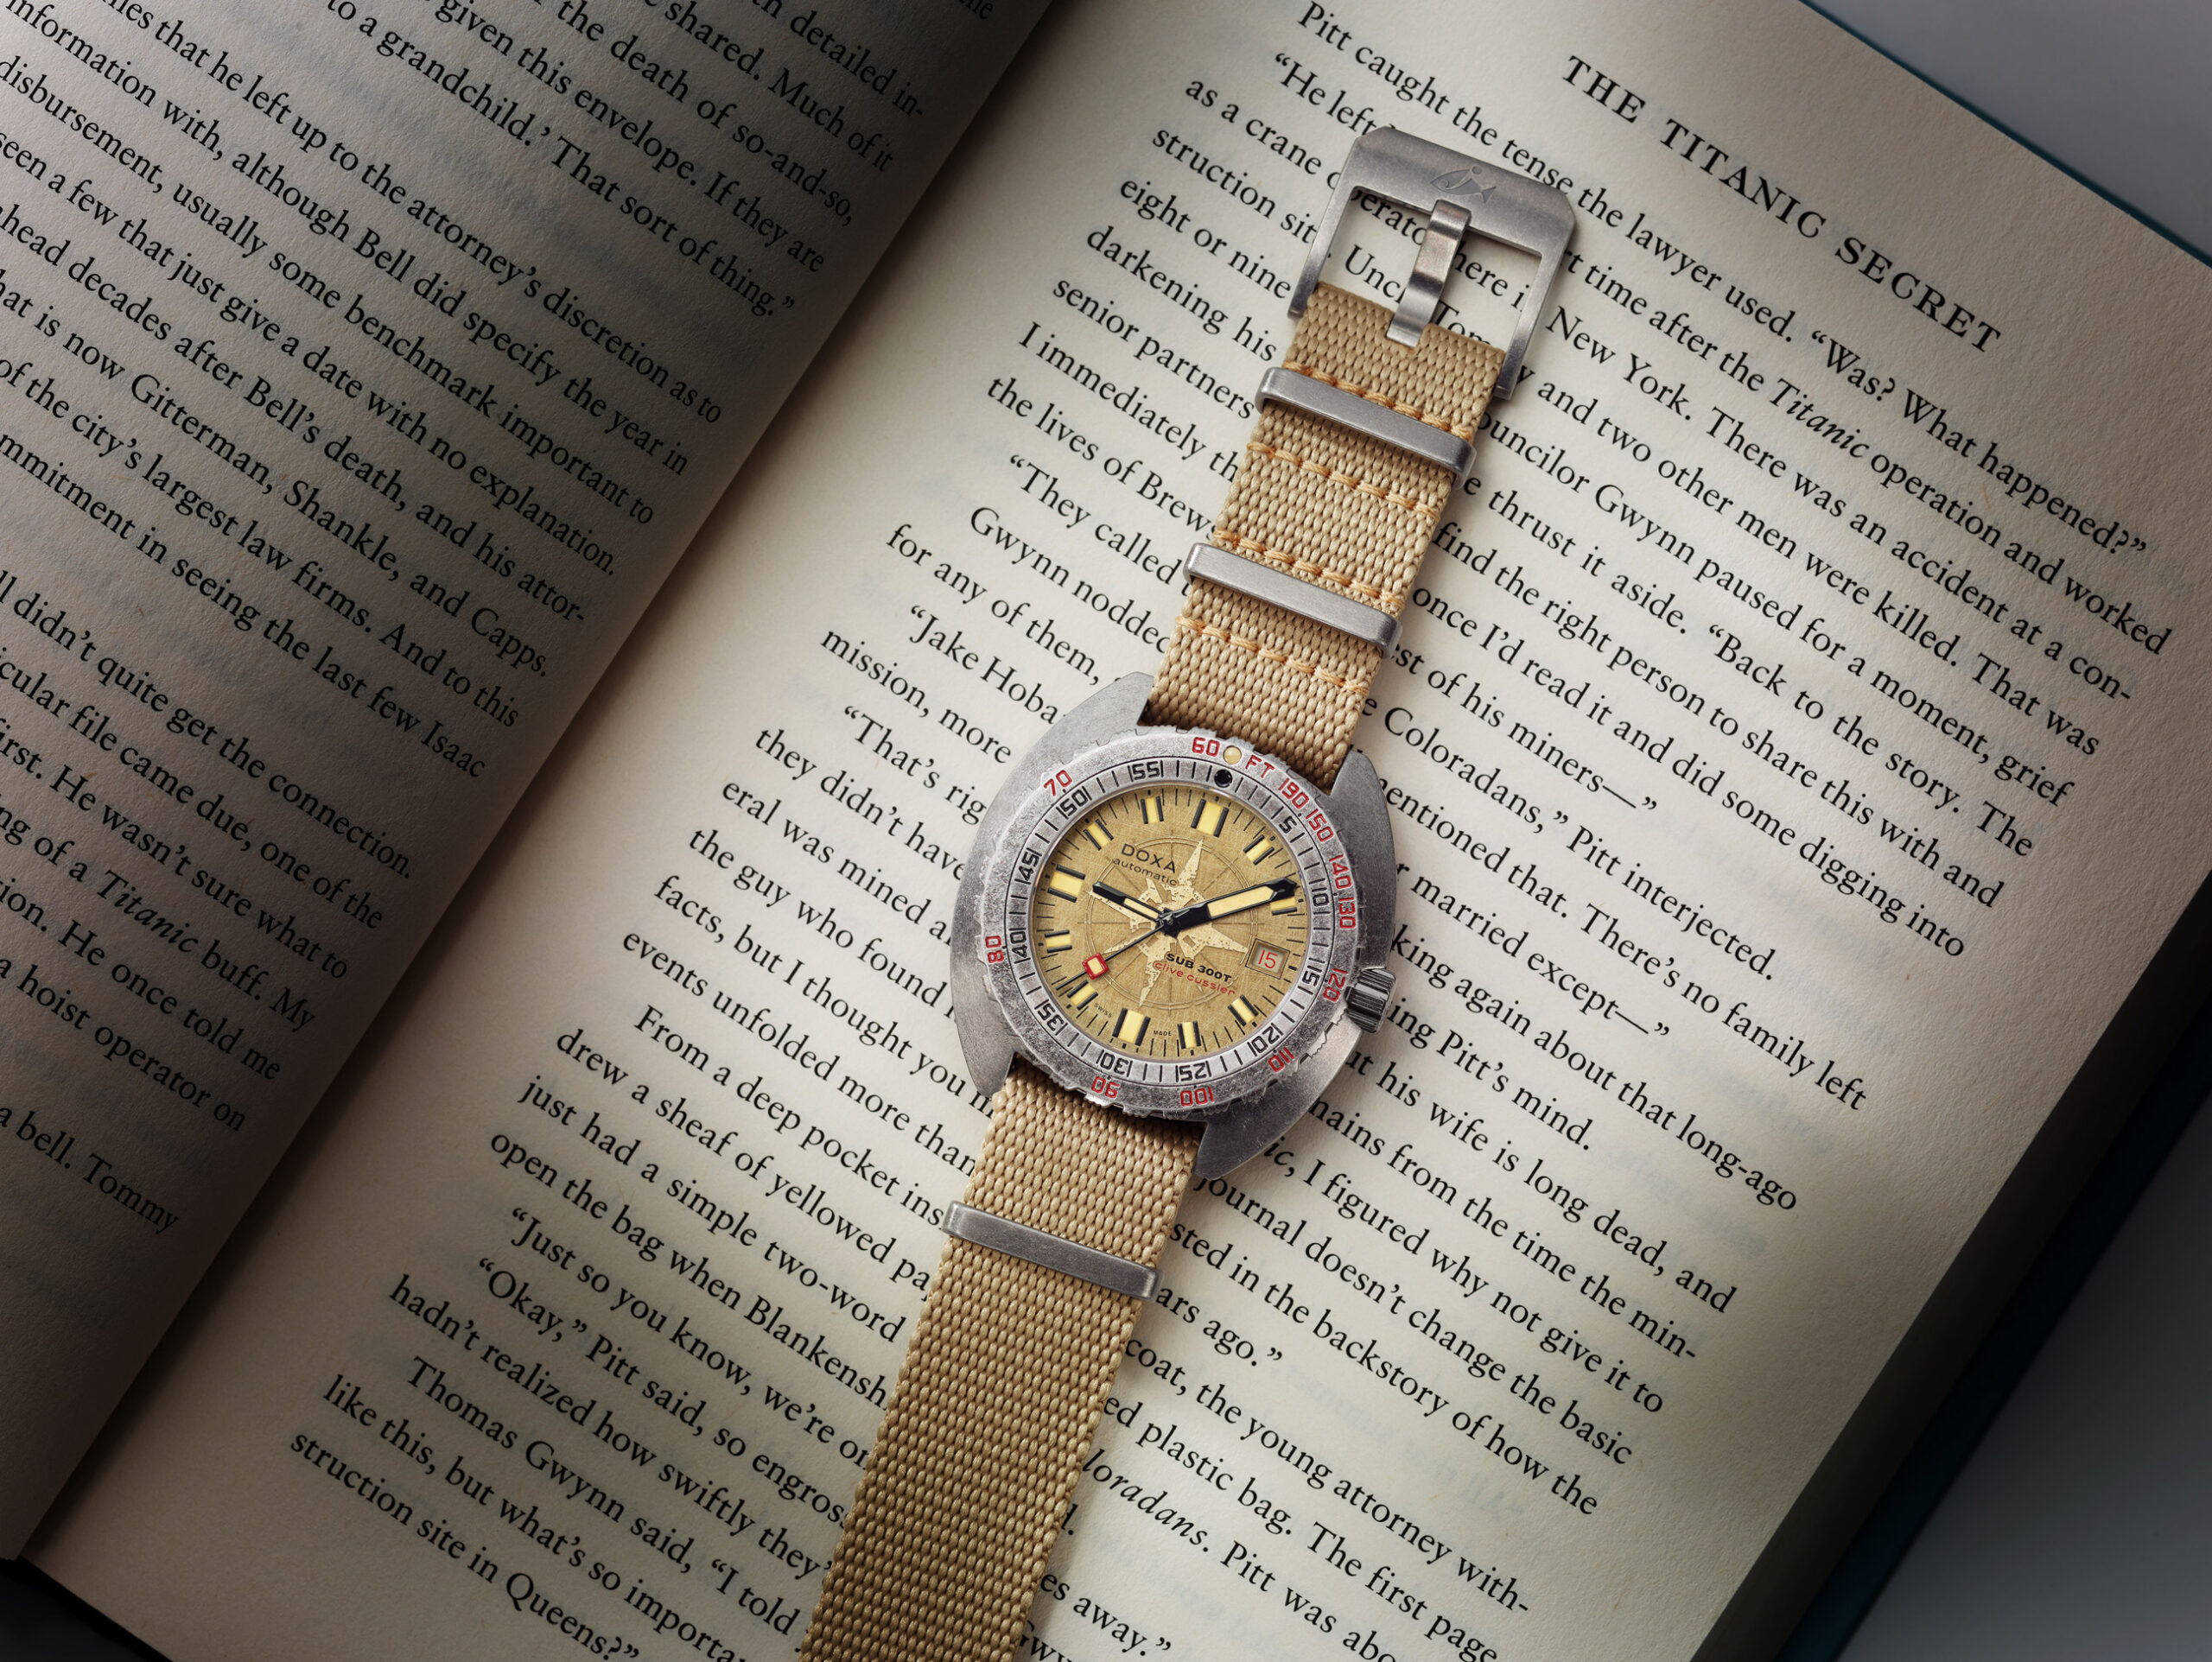 Sub 300T Clive Cussler on beige nato strap lying on book